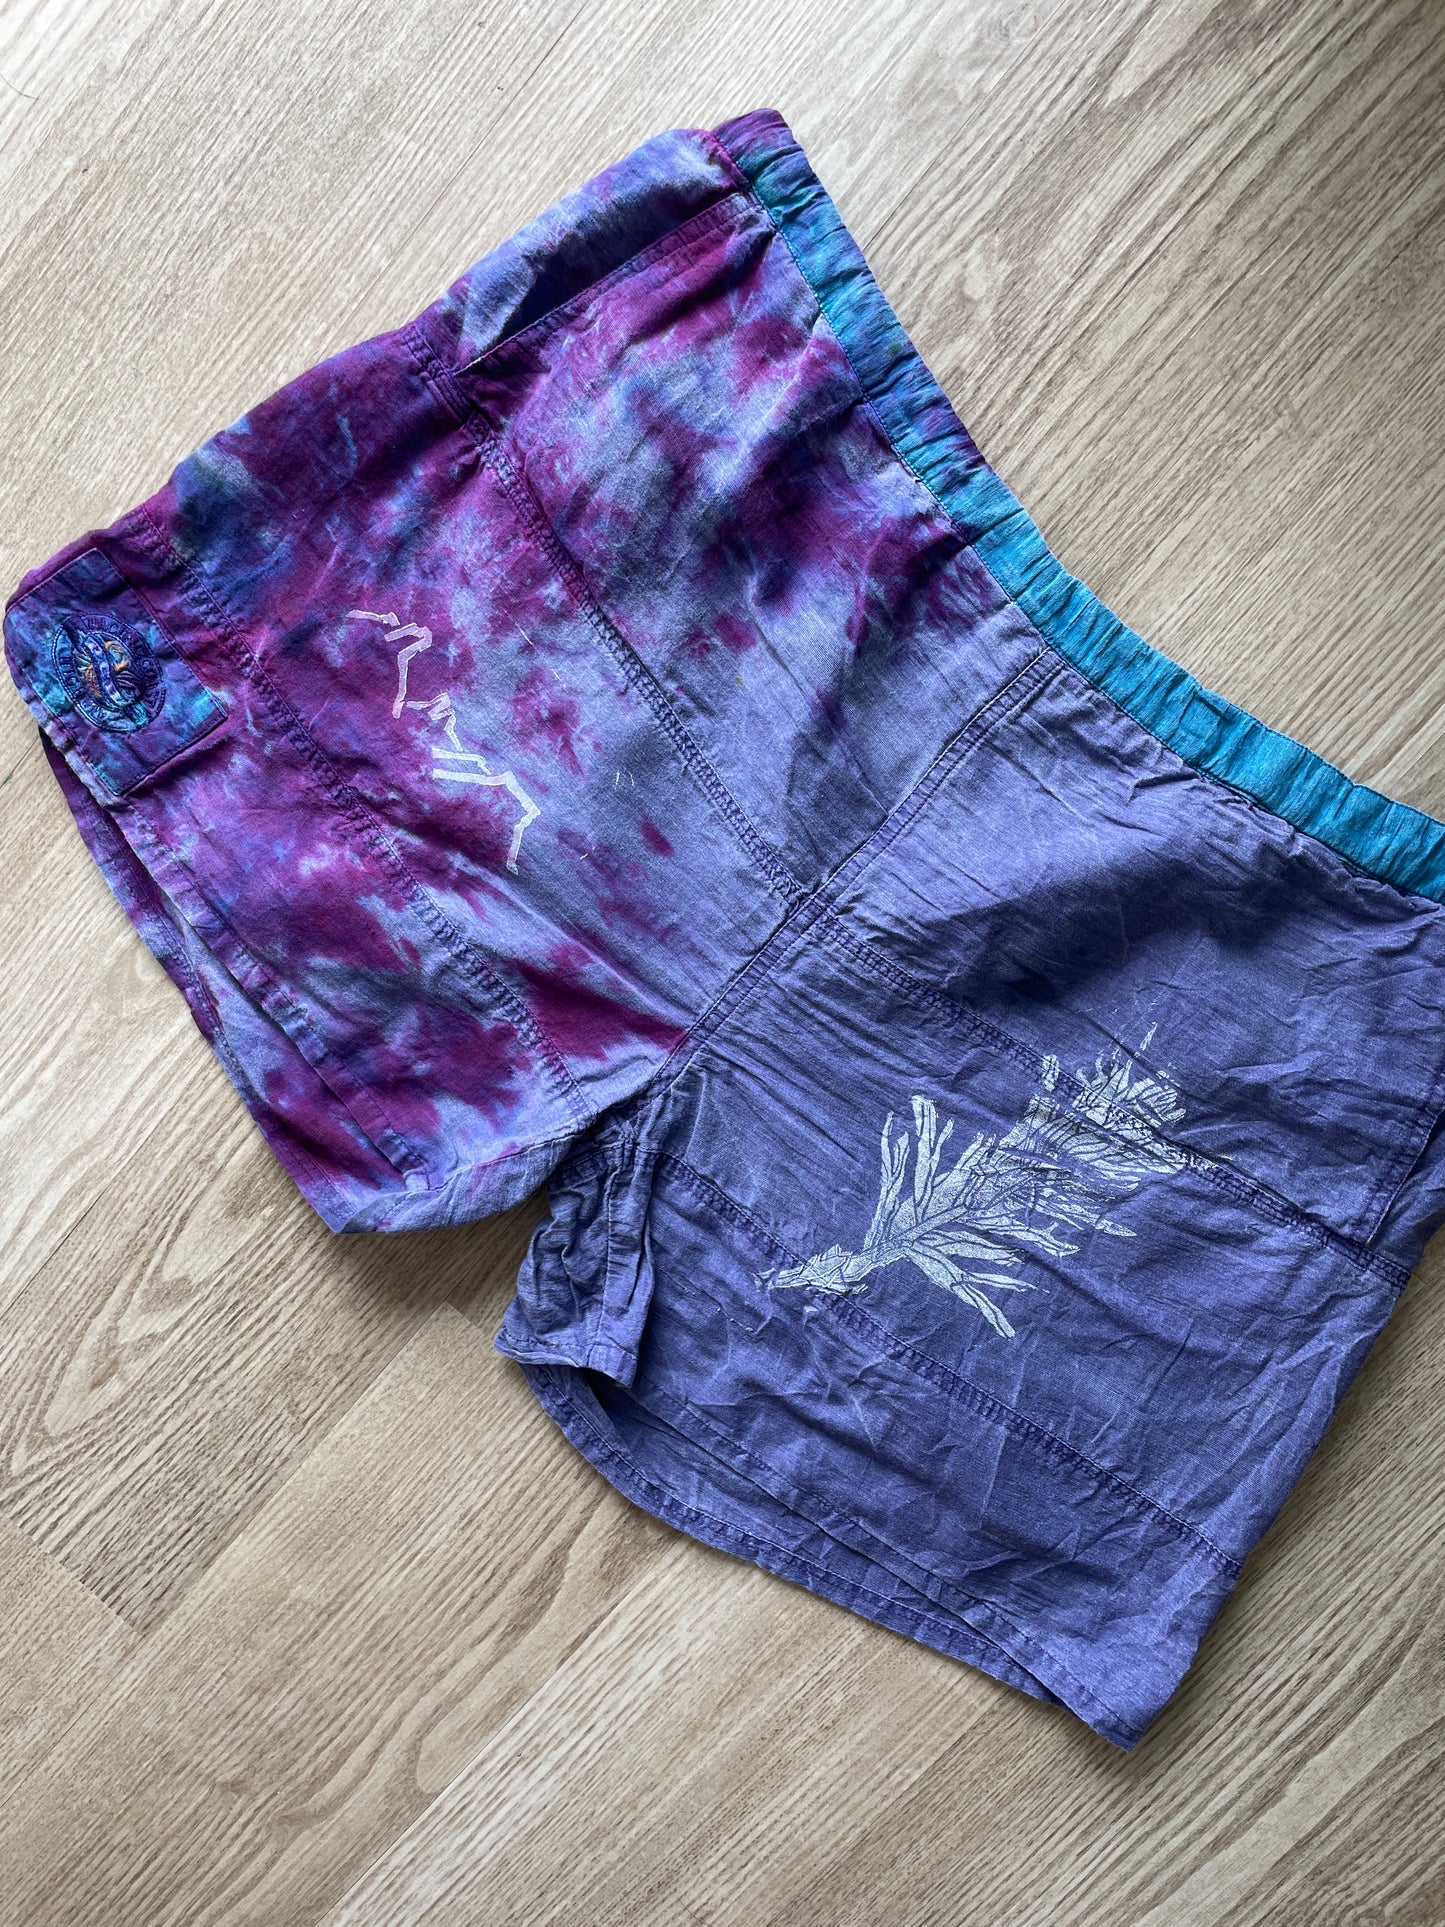 2XL Men’s Pacific Coast Highway Tie Dye Vintage Chino Shorts | One-Of-a-Kind Upcycled Blue and Purple Crumpled Casual Shorts